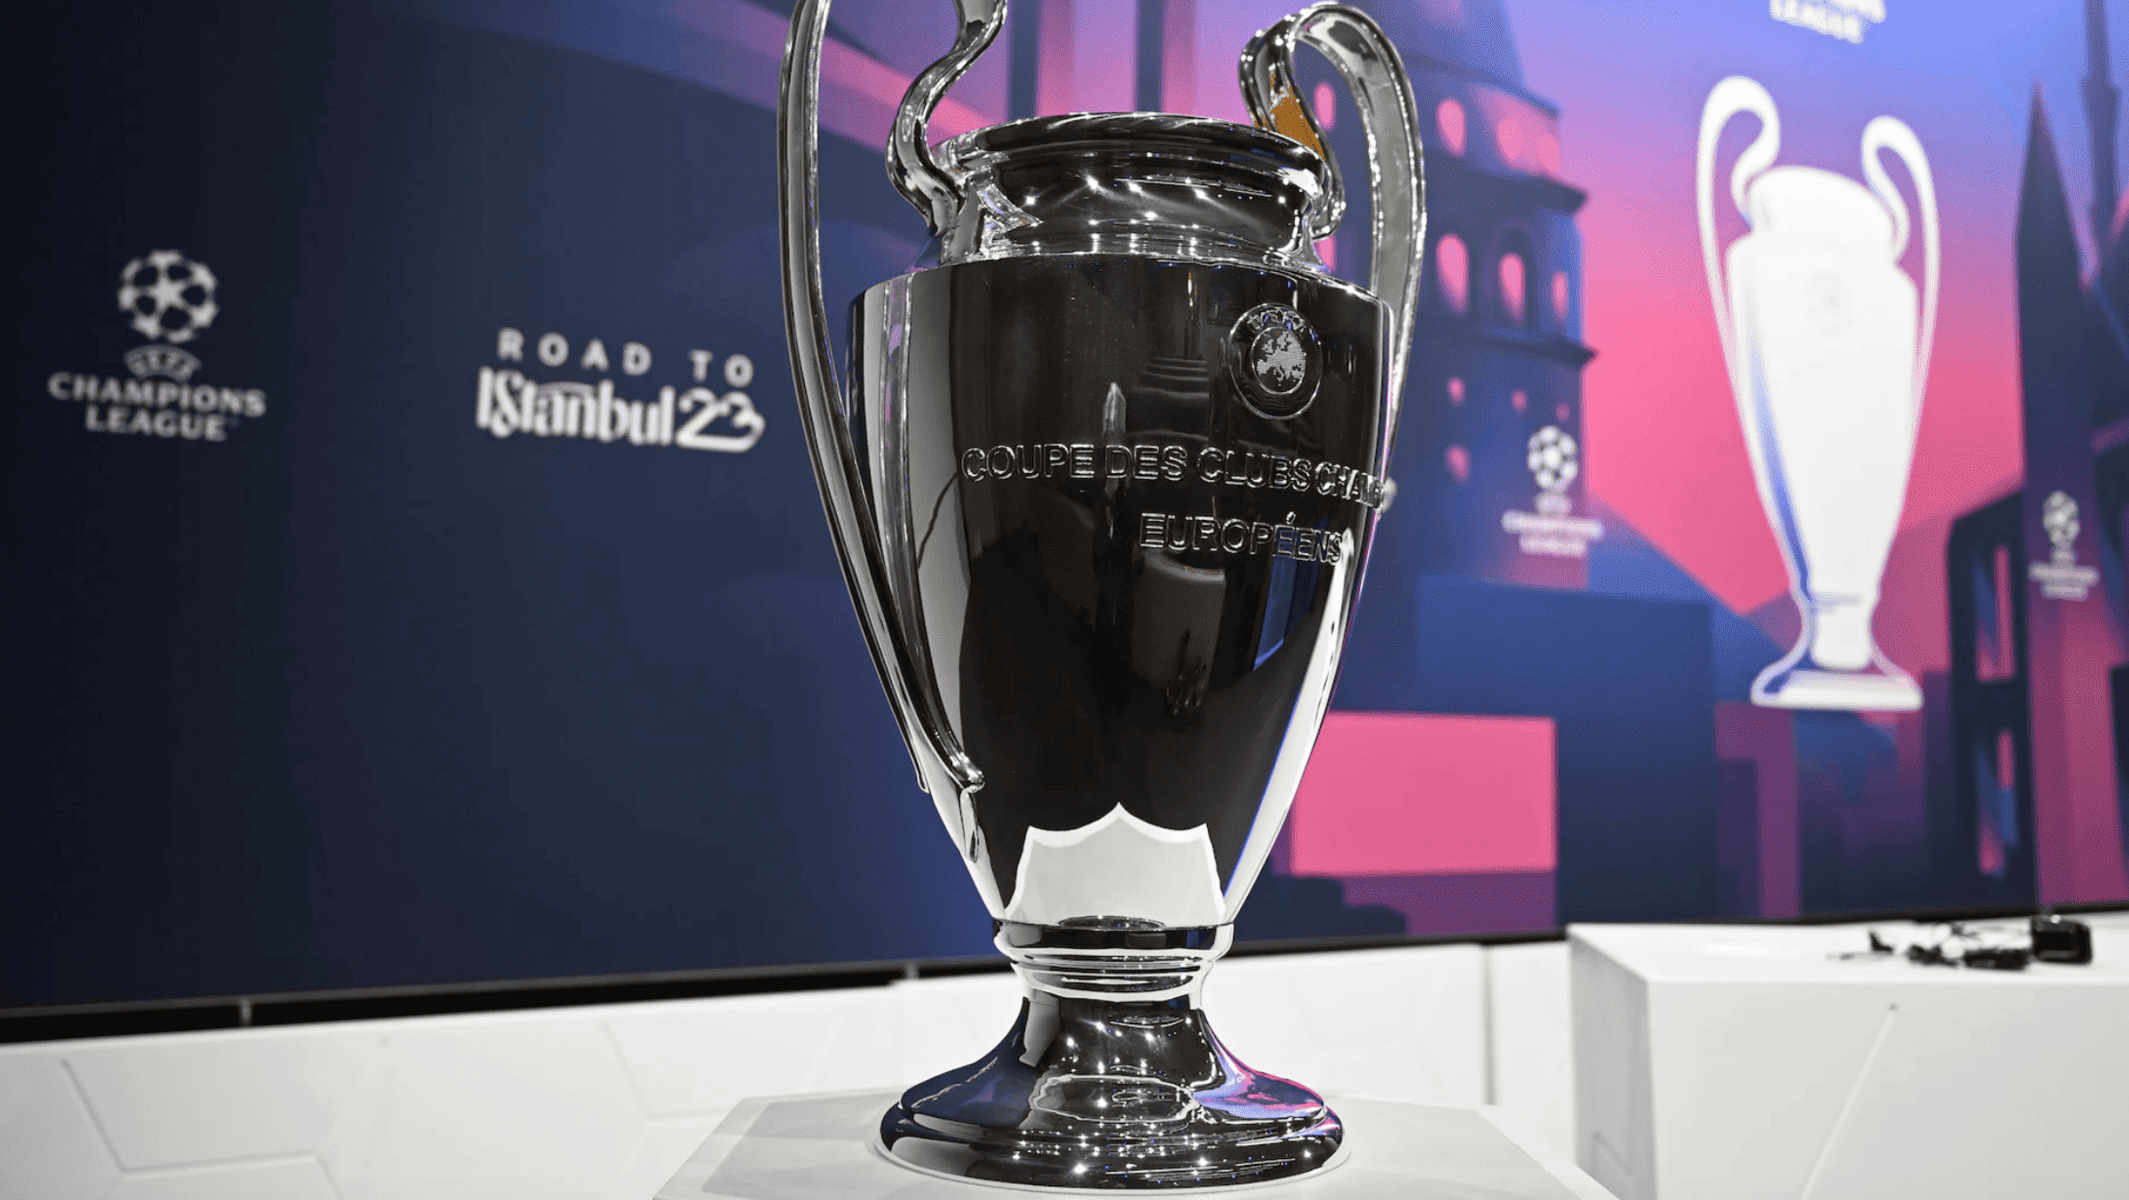 Champion League Trophy on Stage